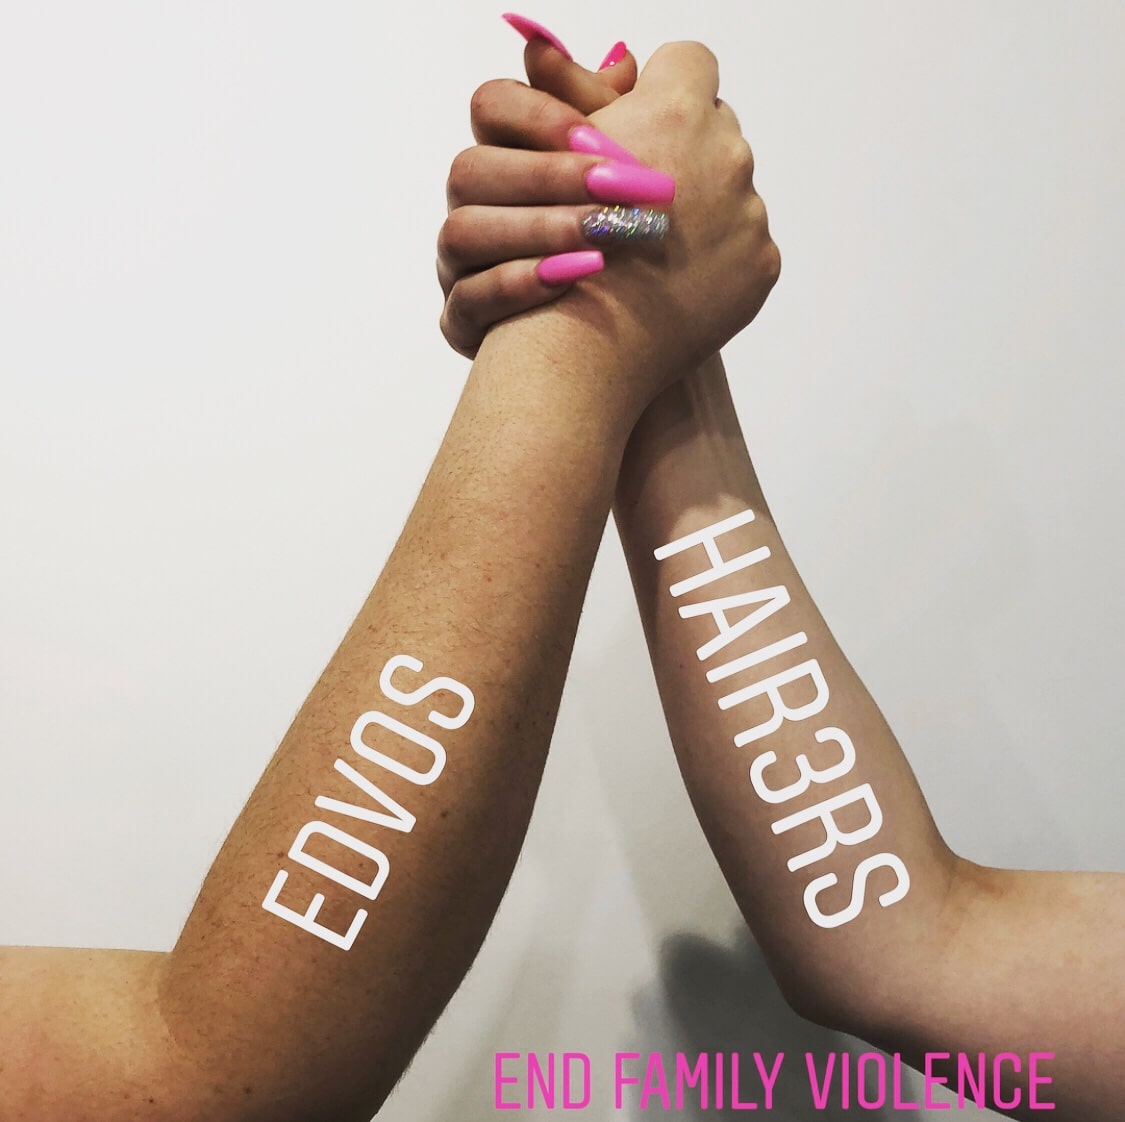 two hands together with captions on arms that says endcos, hair 3r's and end family violence